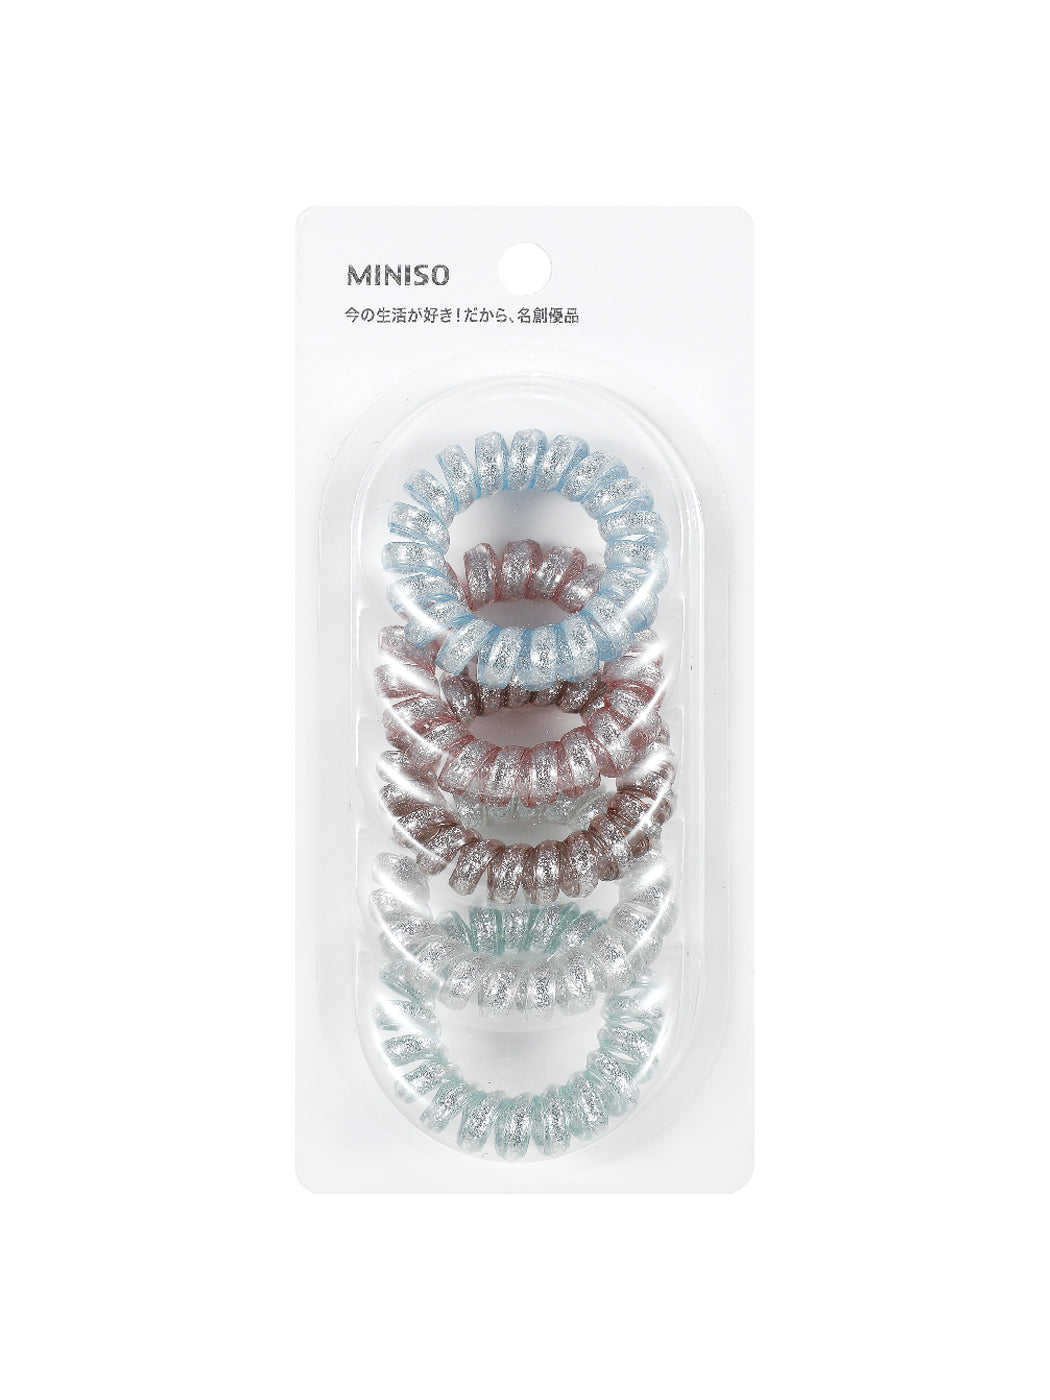 MINISO 4.5 COLORED SPIRAL HAIR TIES ( 5PCS ) 2007225610104 HAIR TIE